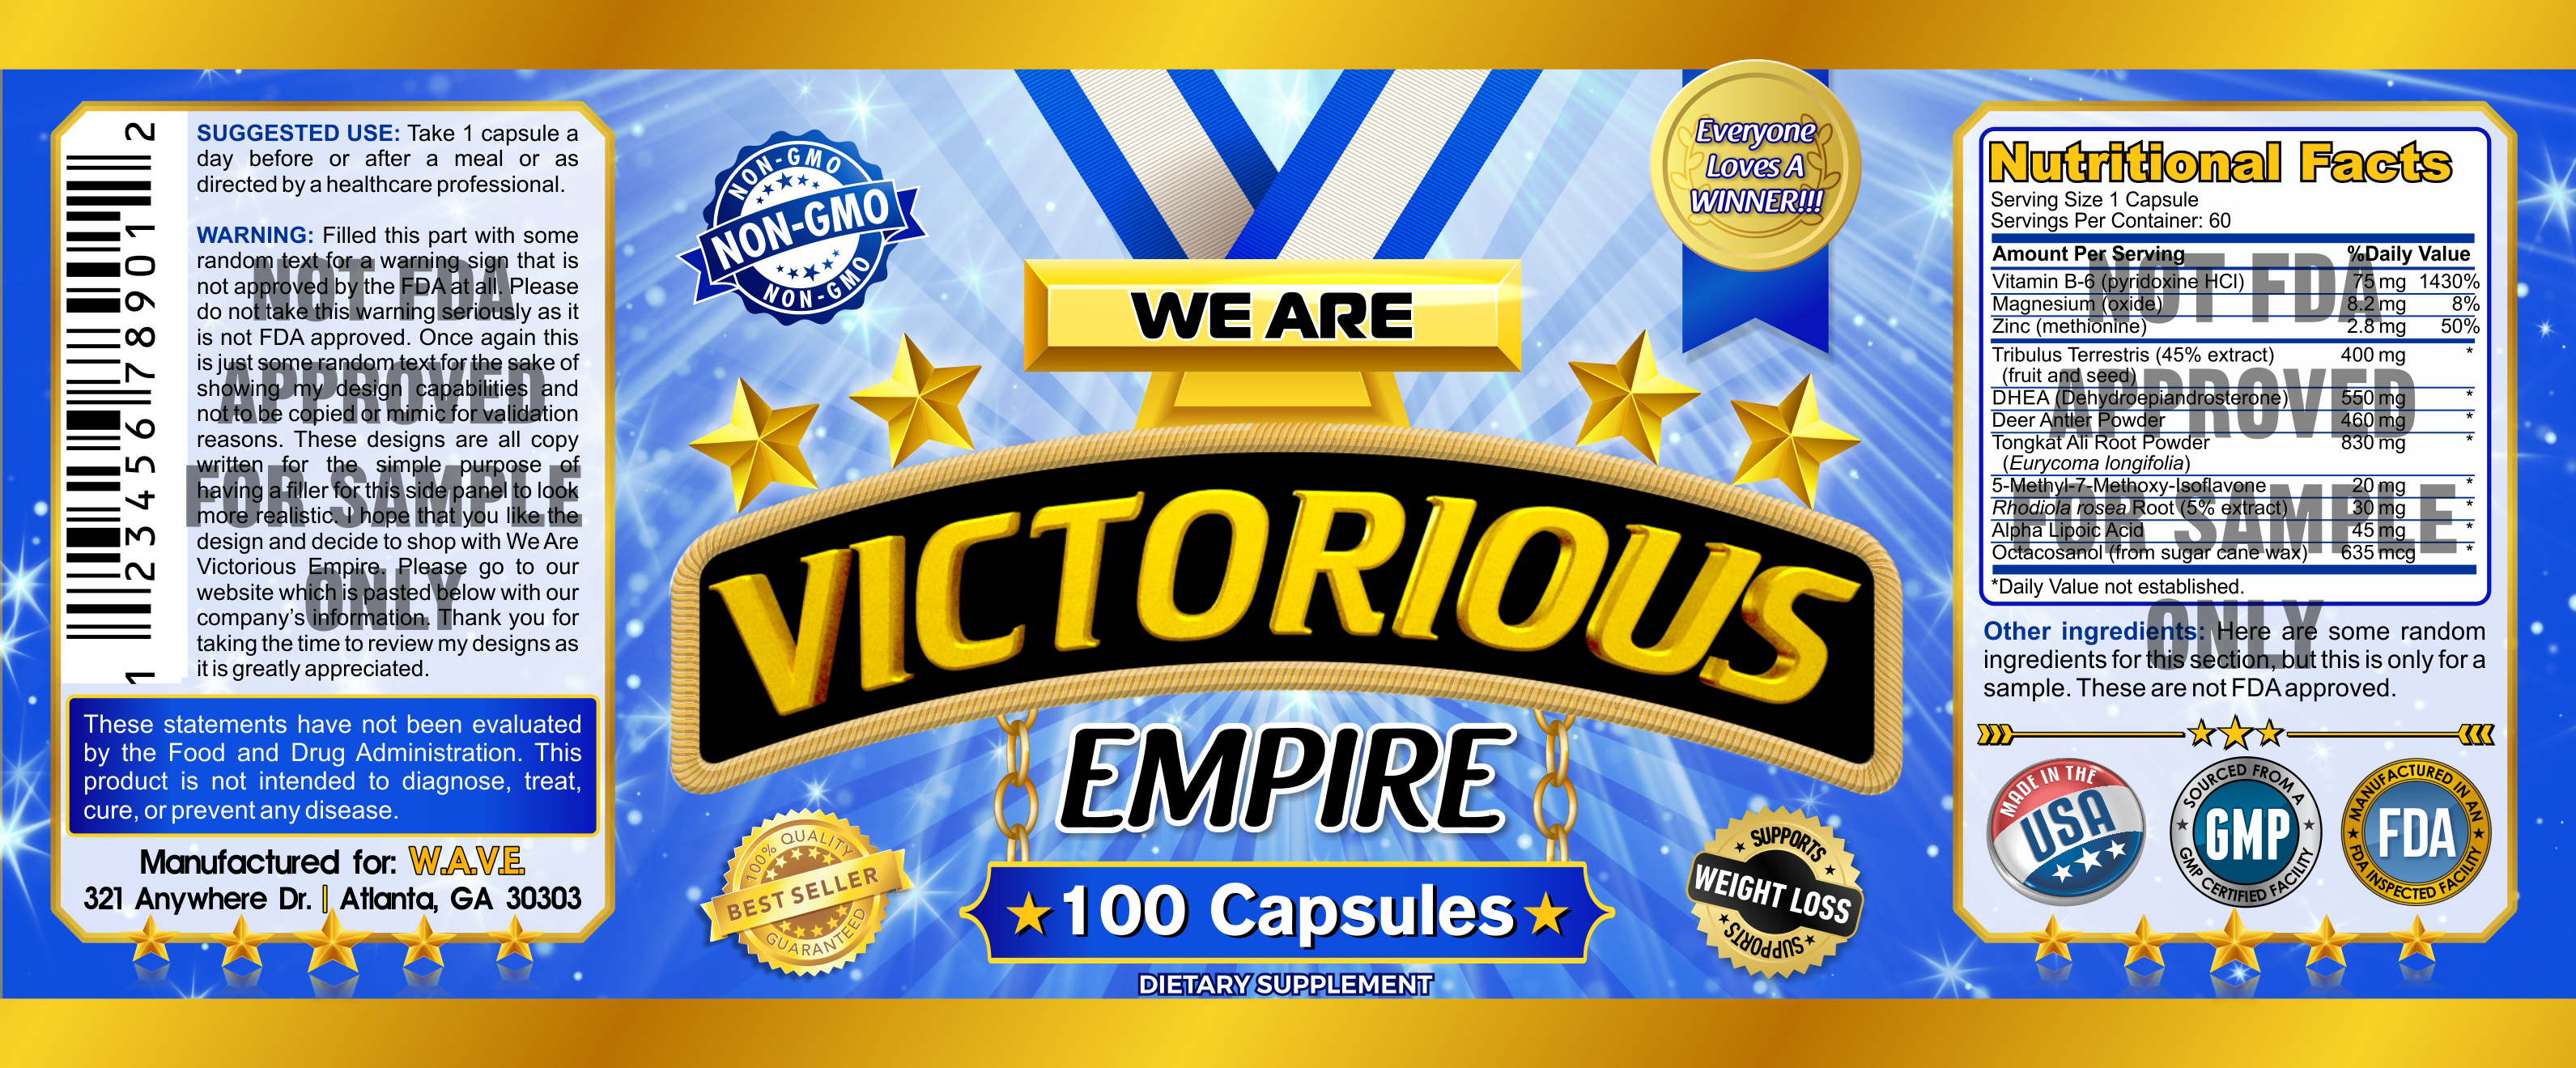 We Are Victorious label design